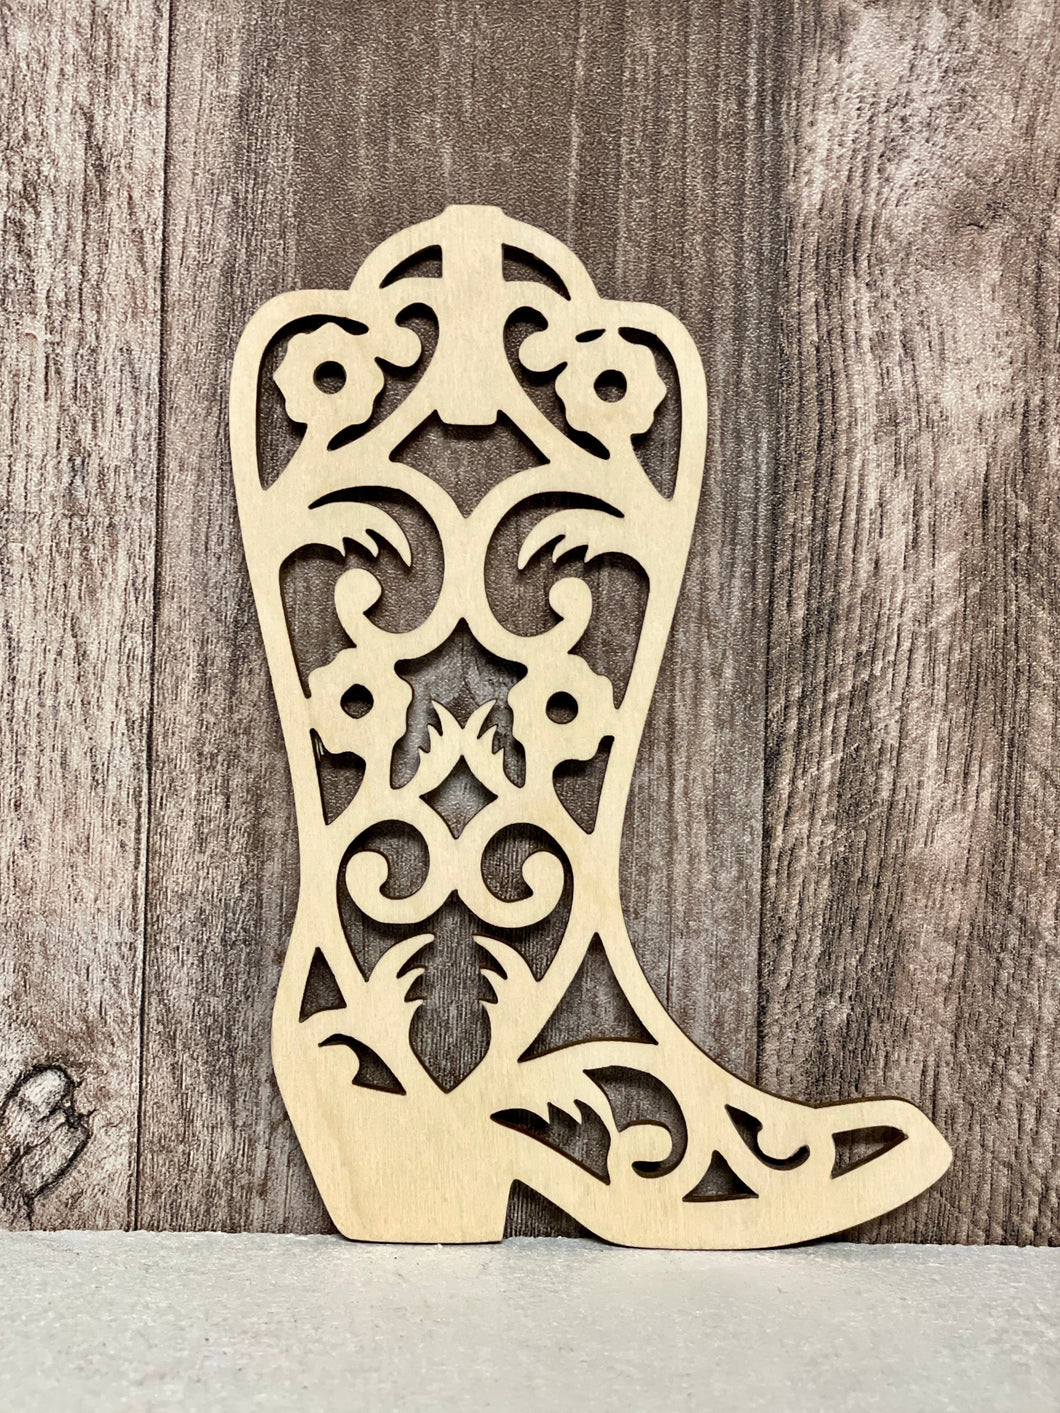 Wood Cowboy Boot | Cut Out | Crafting | Decorations | Home Decor | DIY | Ready to Paint | Stain